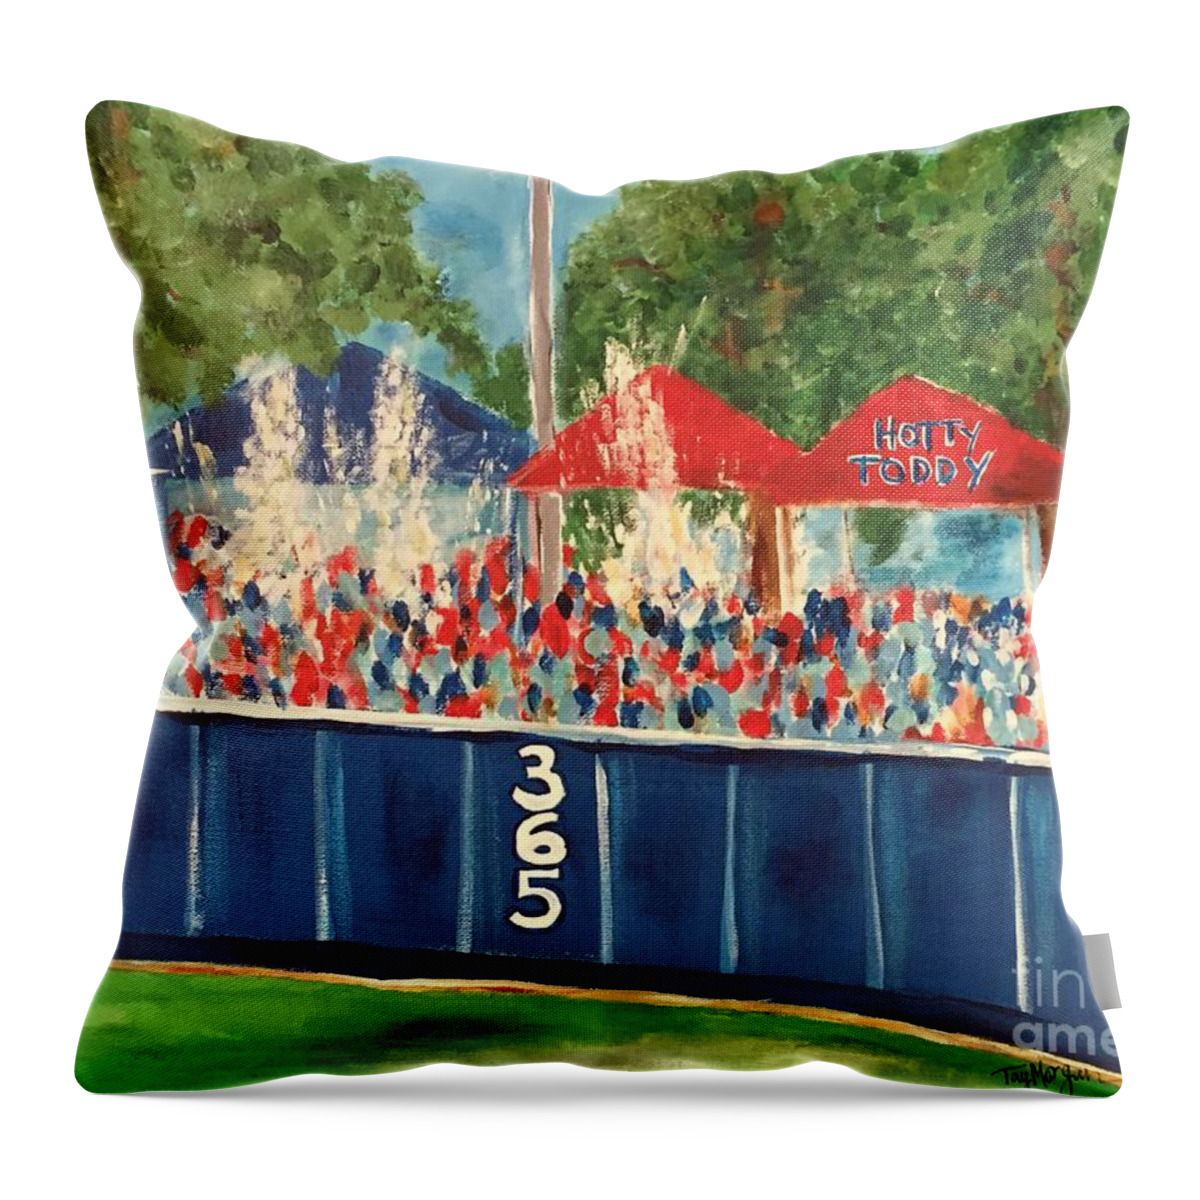 Ole Throw Pillow featuring the painting Ole Miss Swayze Beer Showers by Tay Cossar Morgan